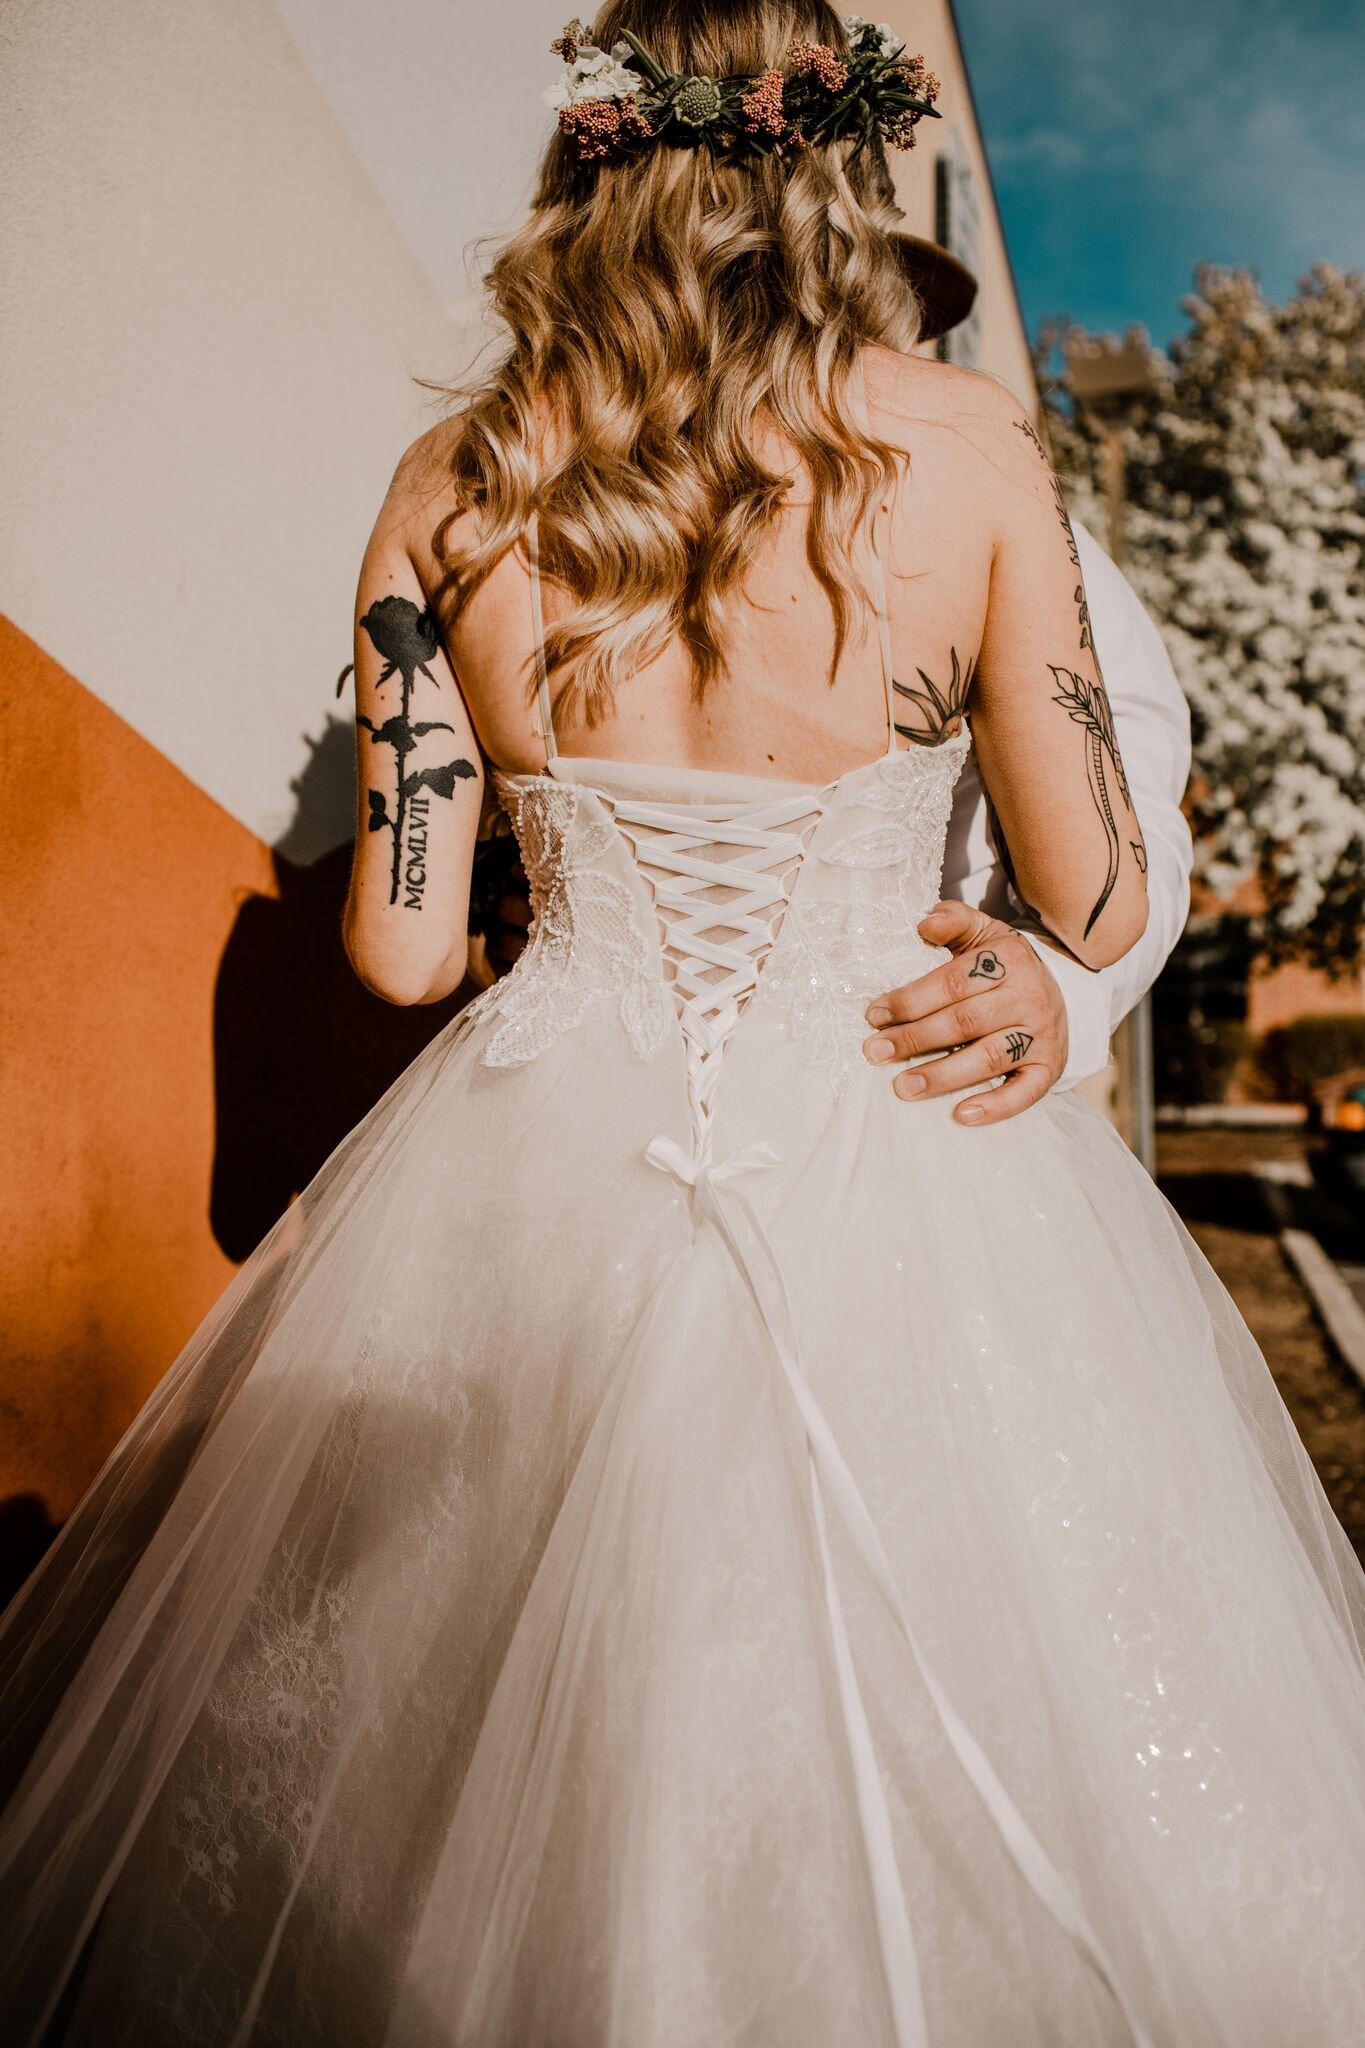 Choosing the Perfect Wedding Bra for Strapless & Low Back Dresses